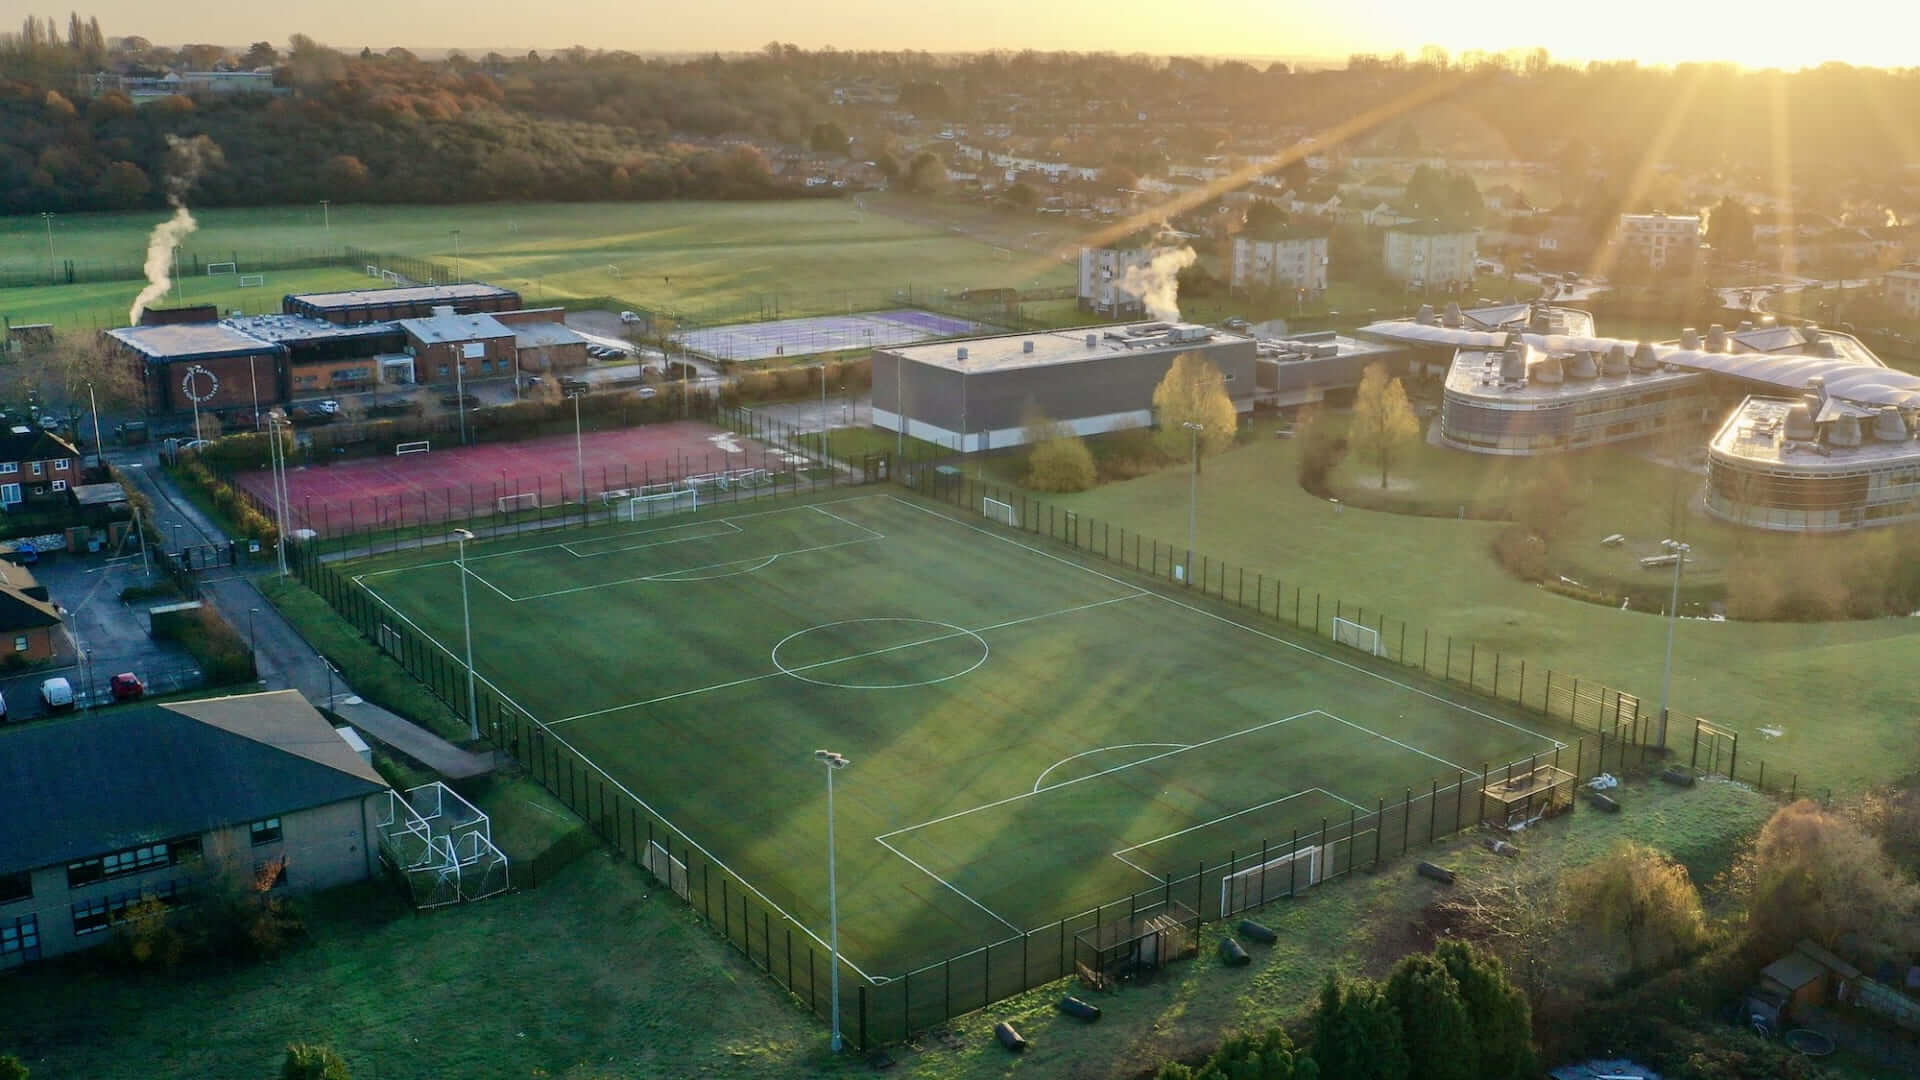 3g football pitch constructed to FIFA quality standard by S&C Slatter for the JOhn Madejski Academy a member of The White Horse Federation